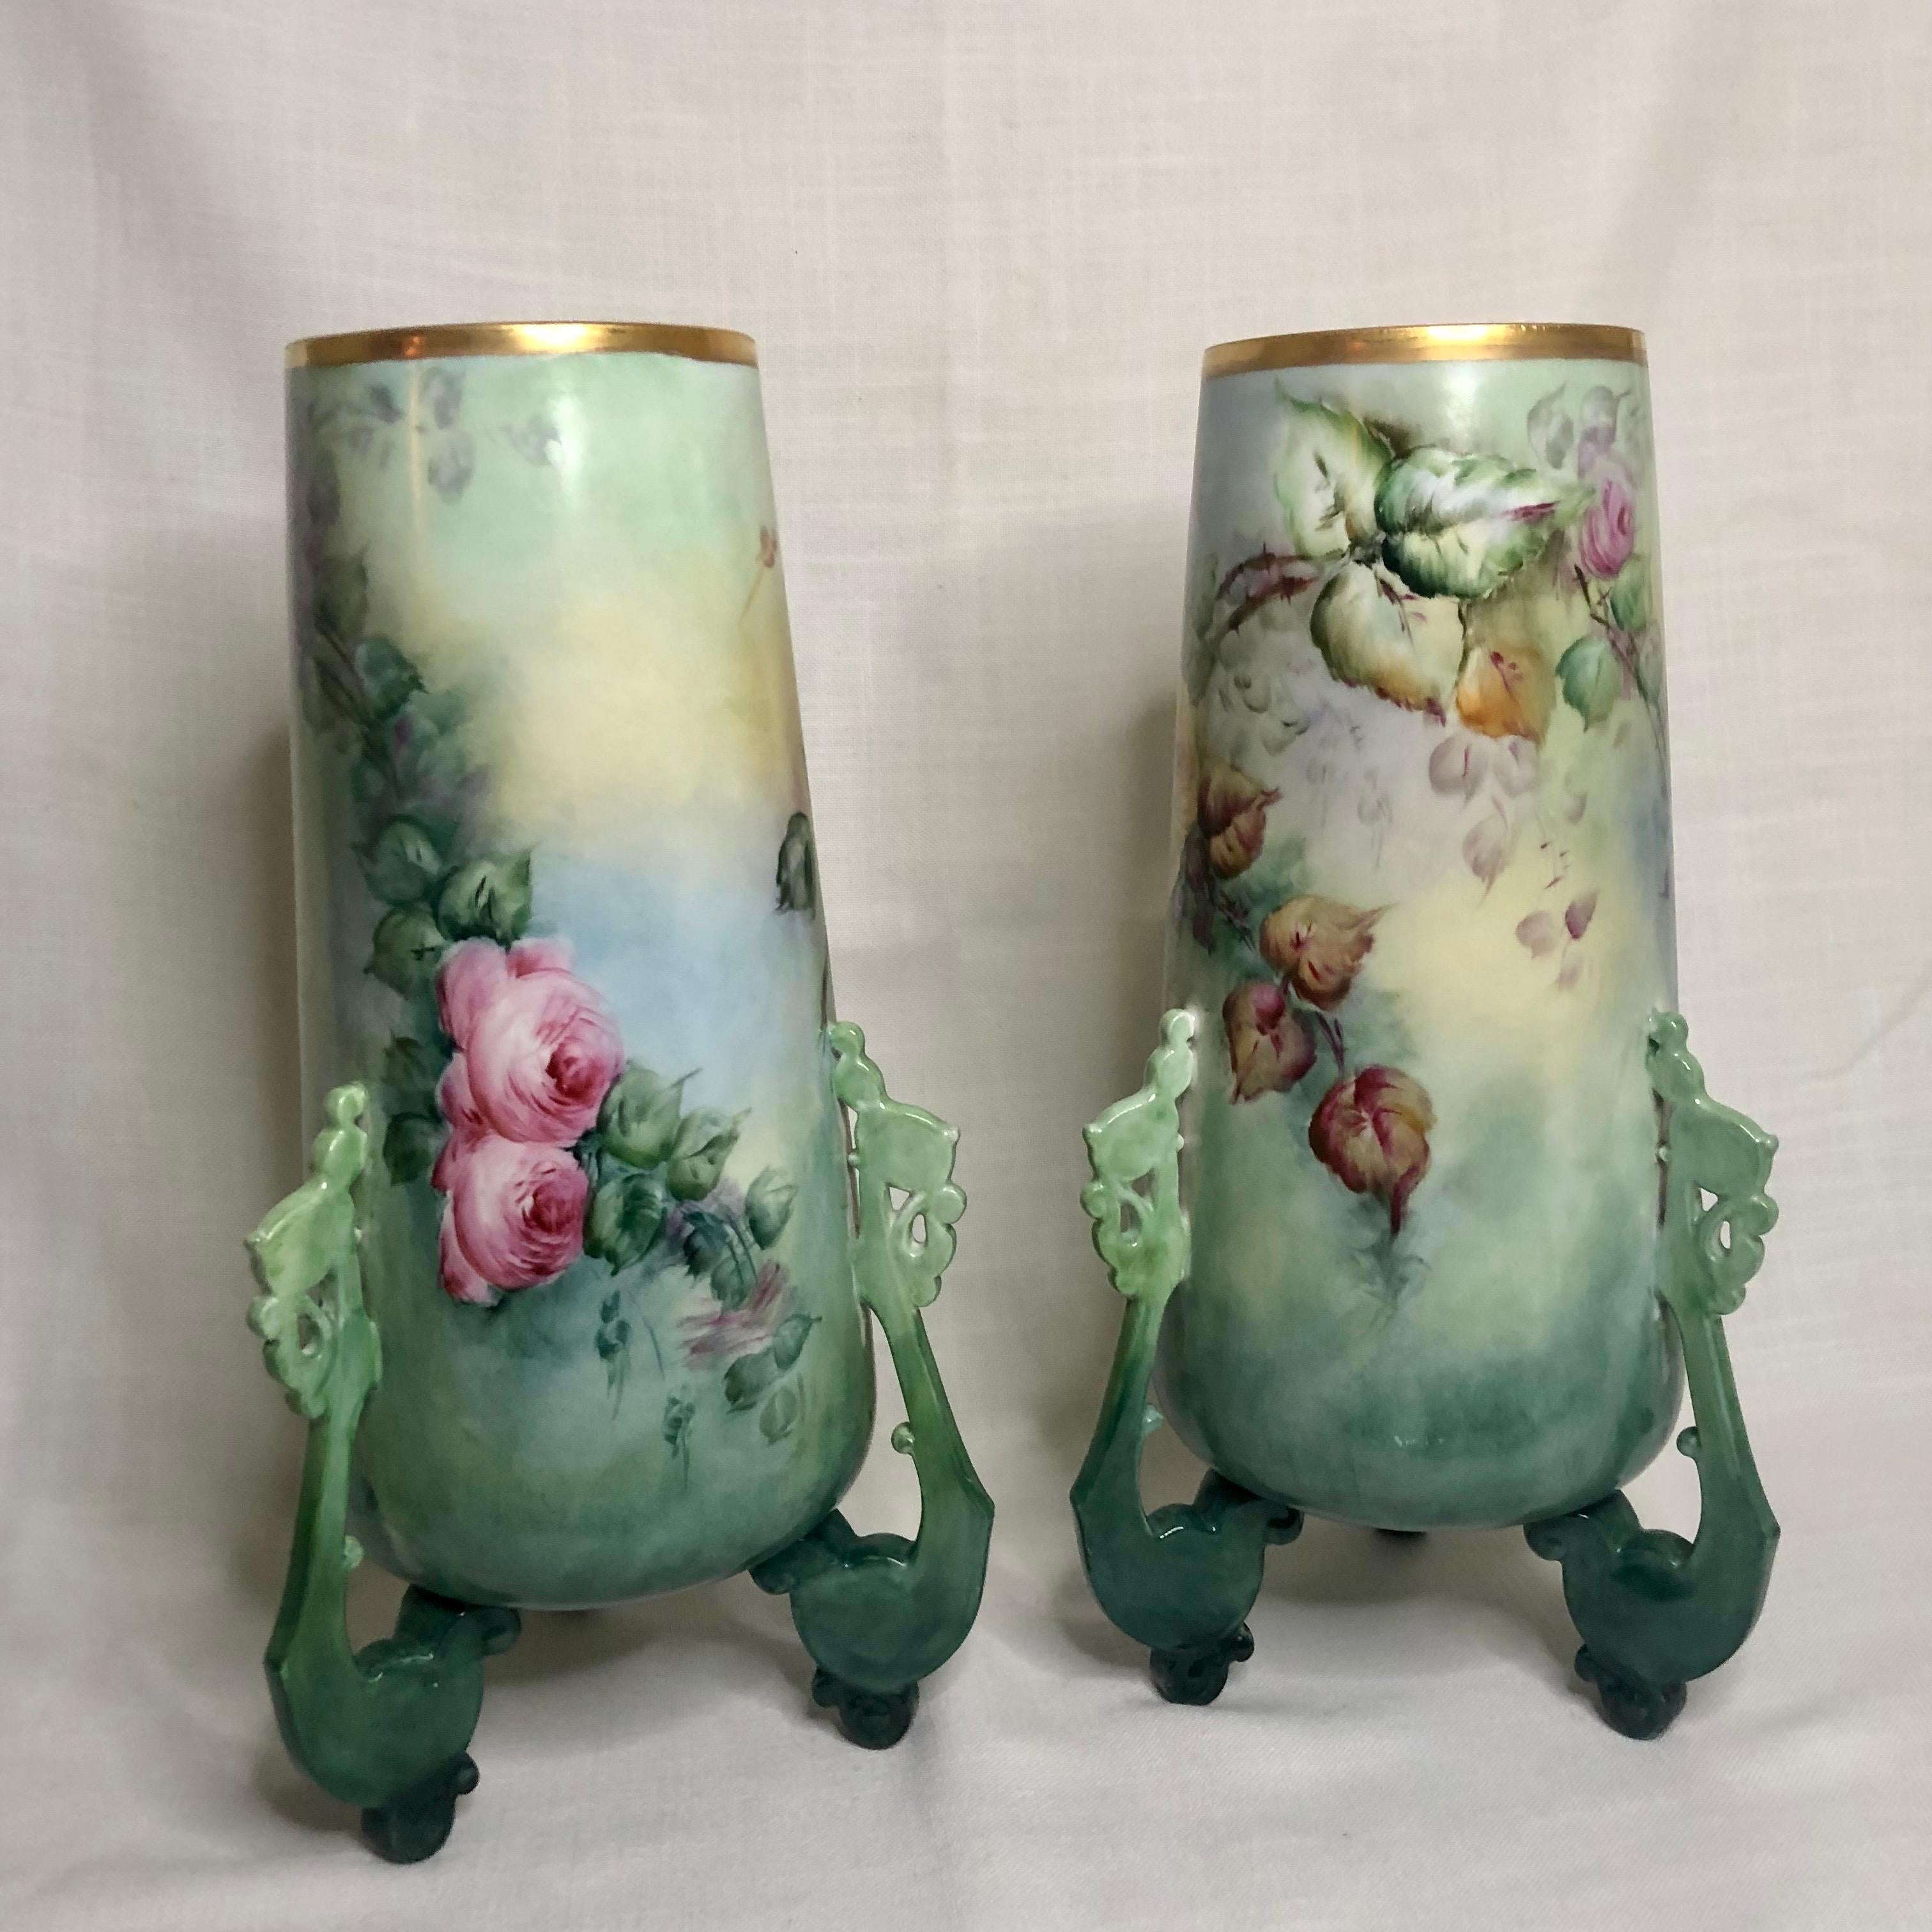 Pair of Large William Guerin Limoges Hand Painted Vases with Roses and Peonies 1